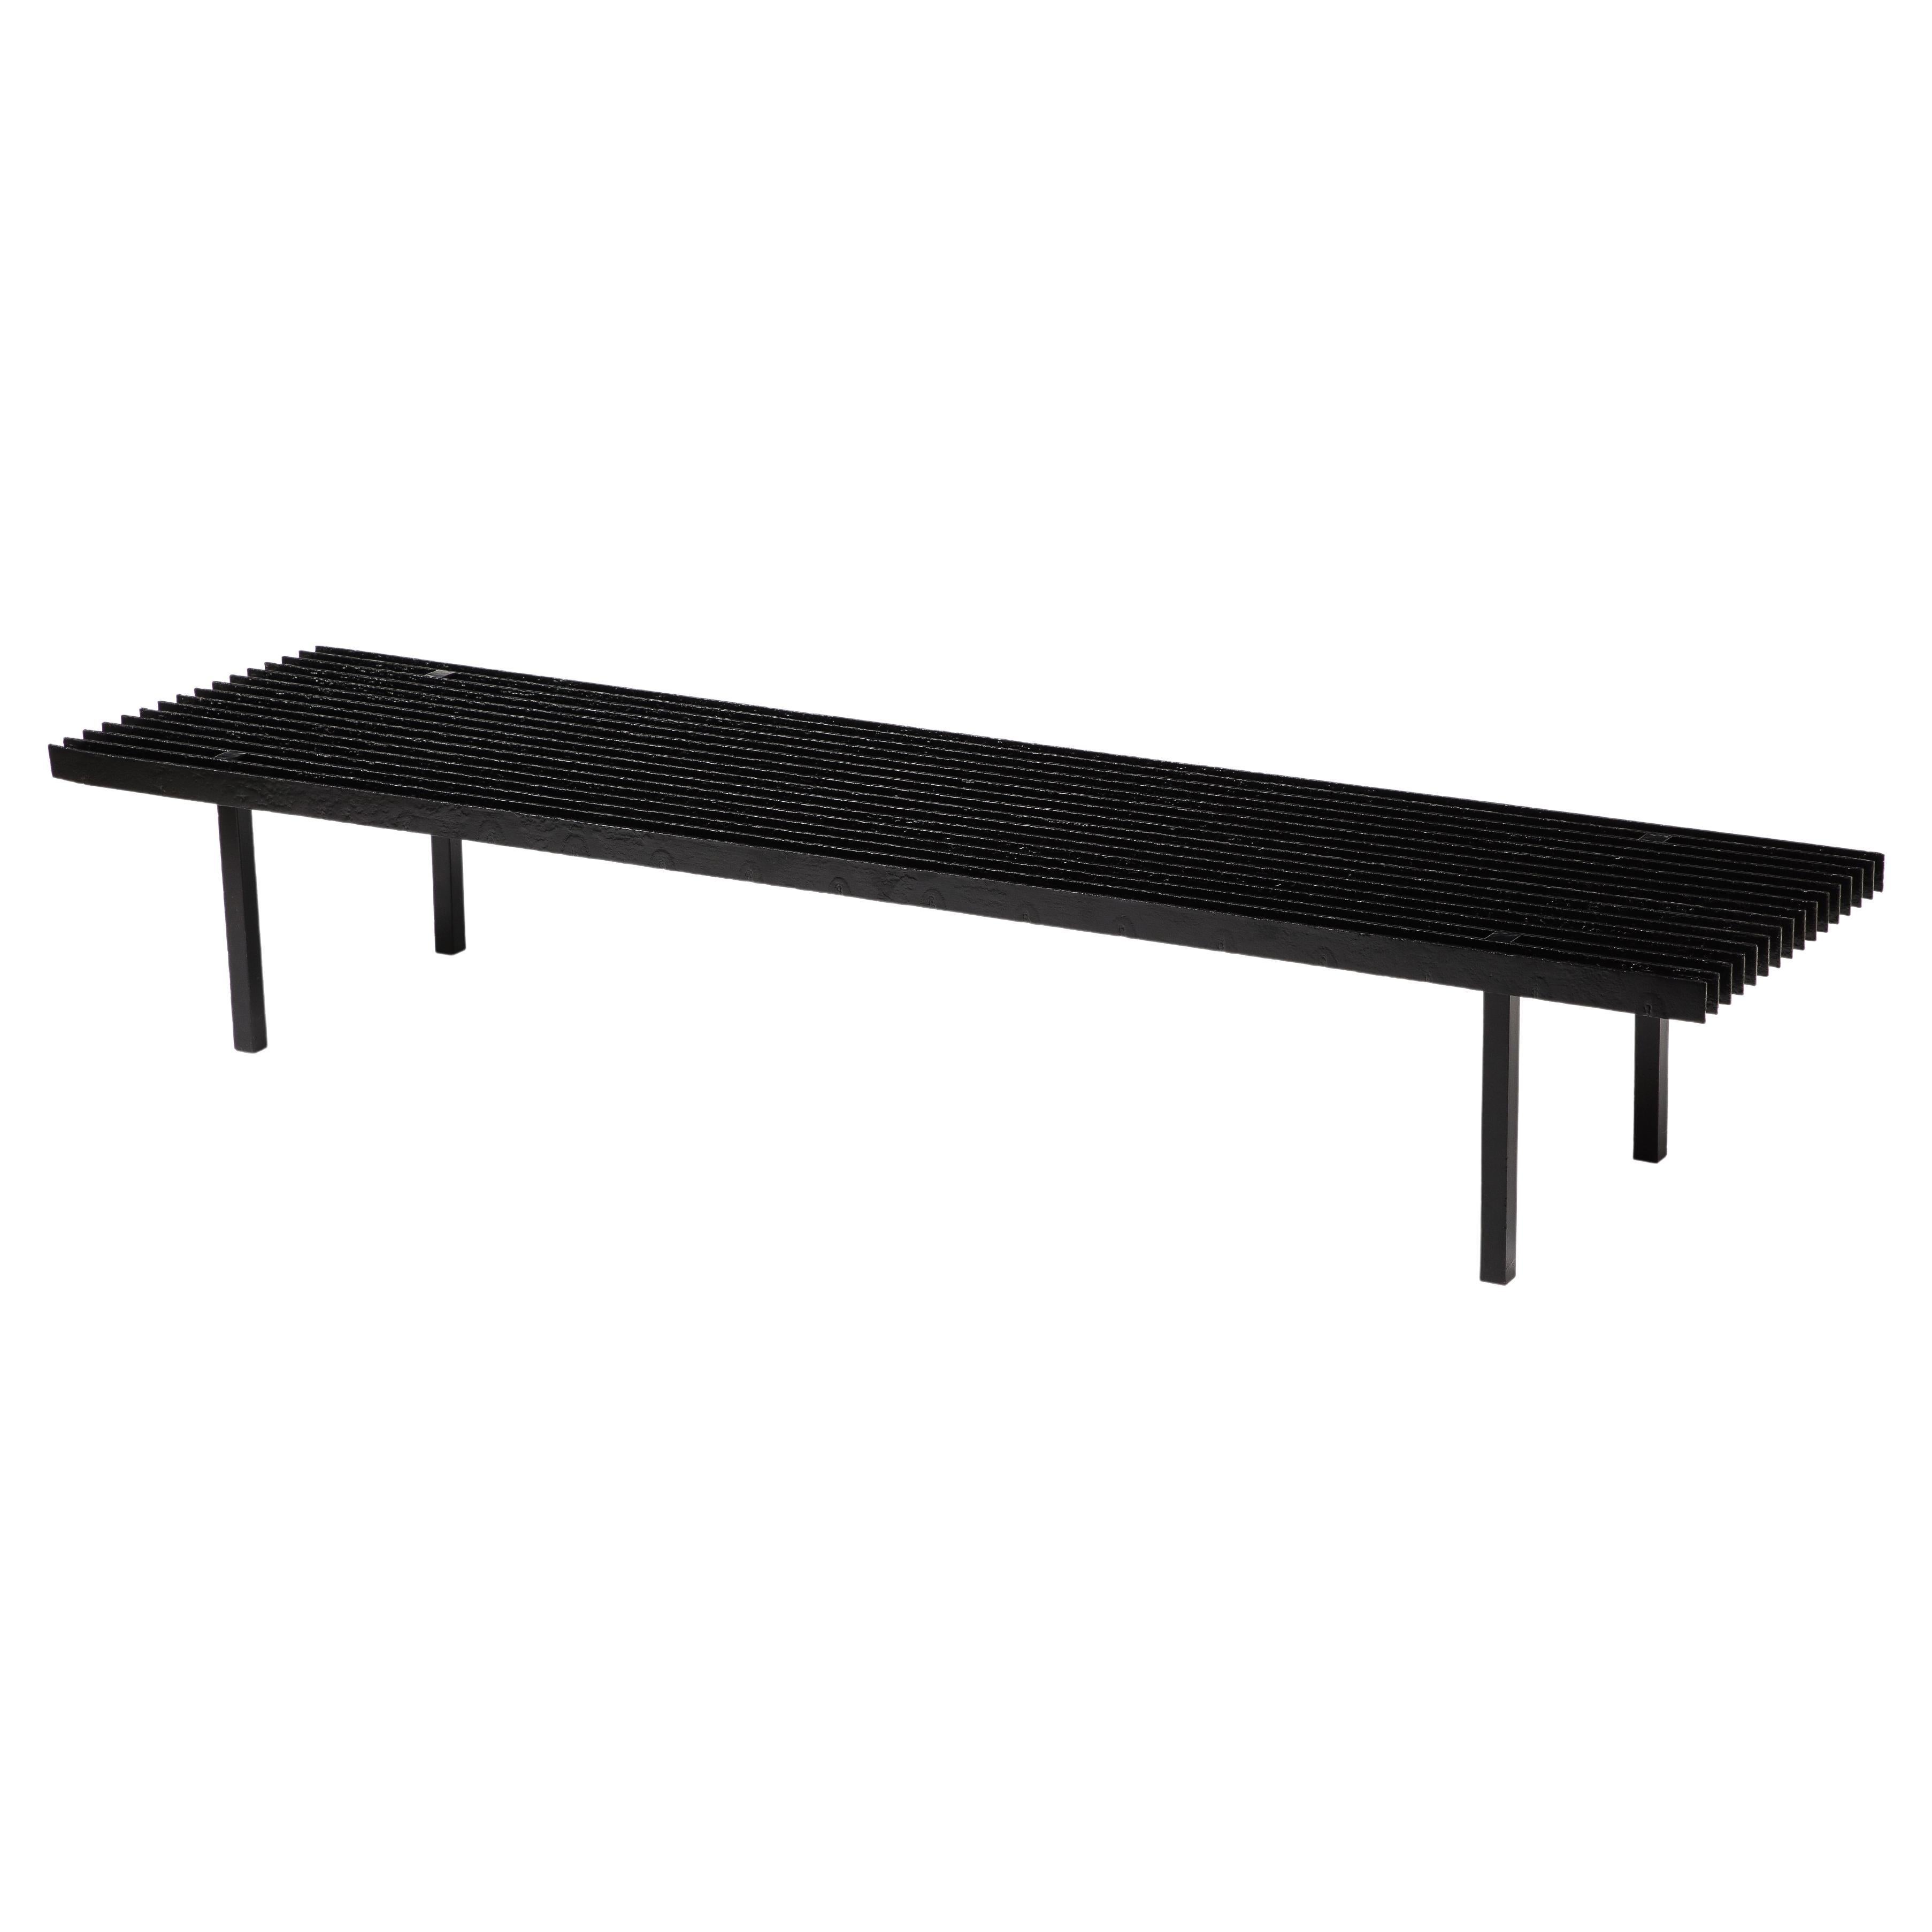 Mid-Century Modern Black Enameled Steel Slat Bench or Low Coffee Table, USA 1970's For Sale